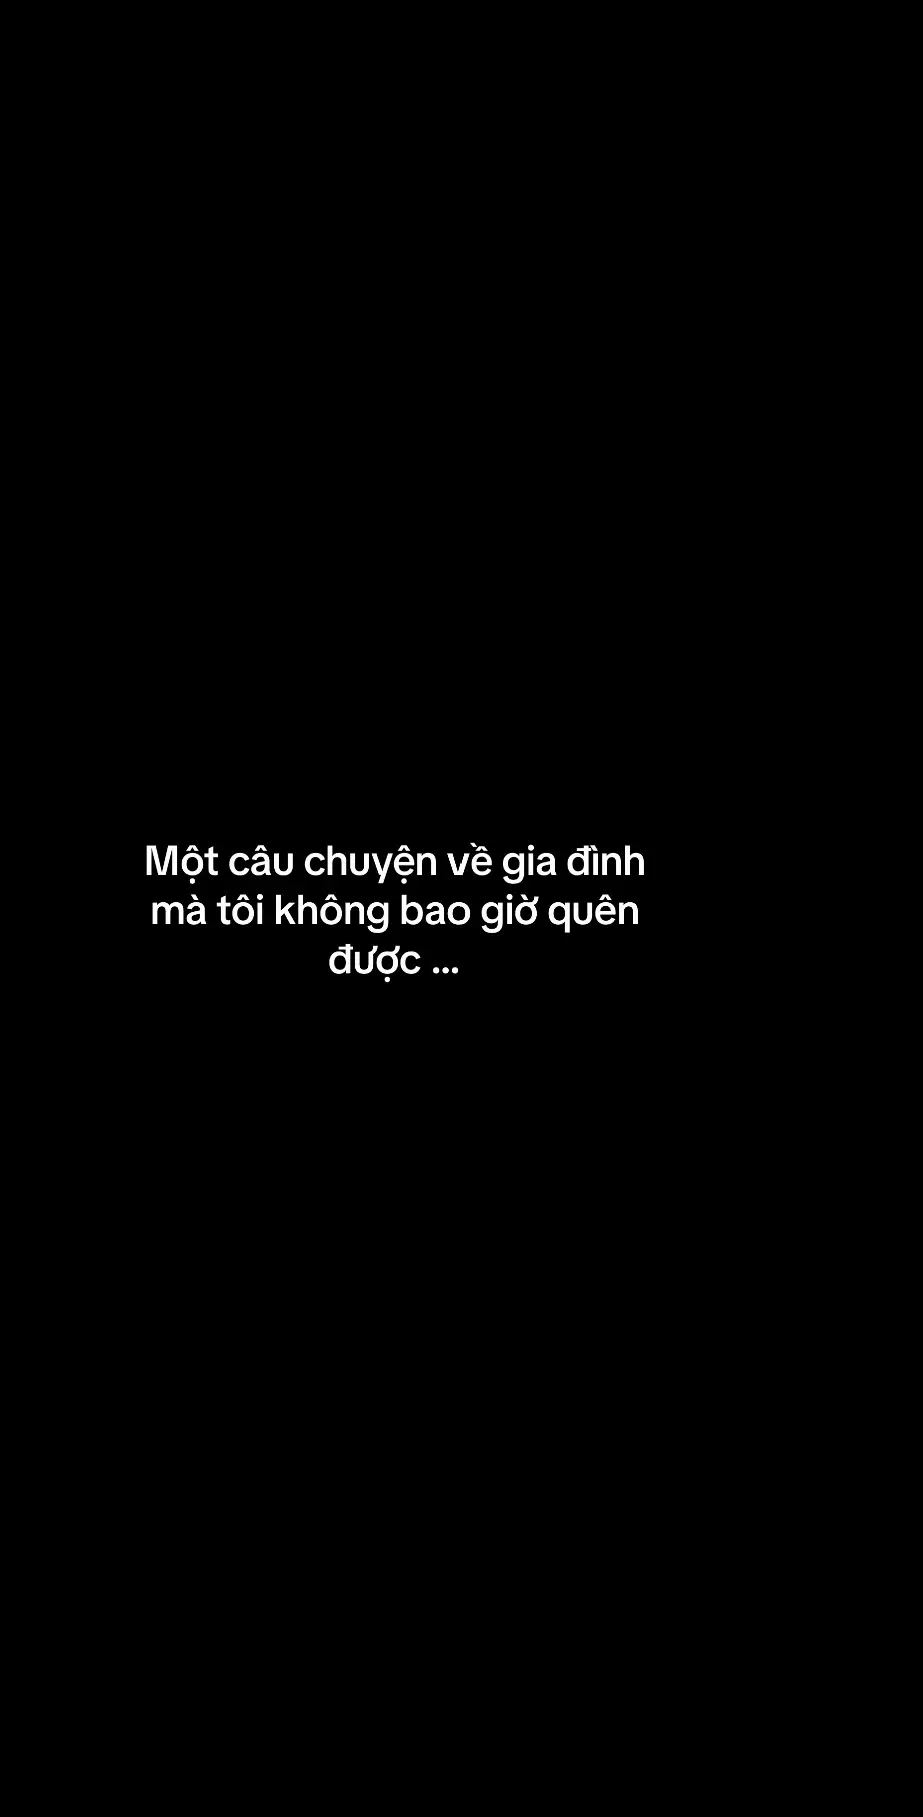 #xuhuong #viral #tiktokgiaitri #tiktoktrend #fyp #fypシ #foryou #foryoupage #chuyengiadinh #giadinh #camdong #kiuctrongtoi 